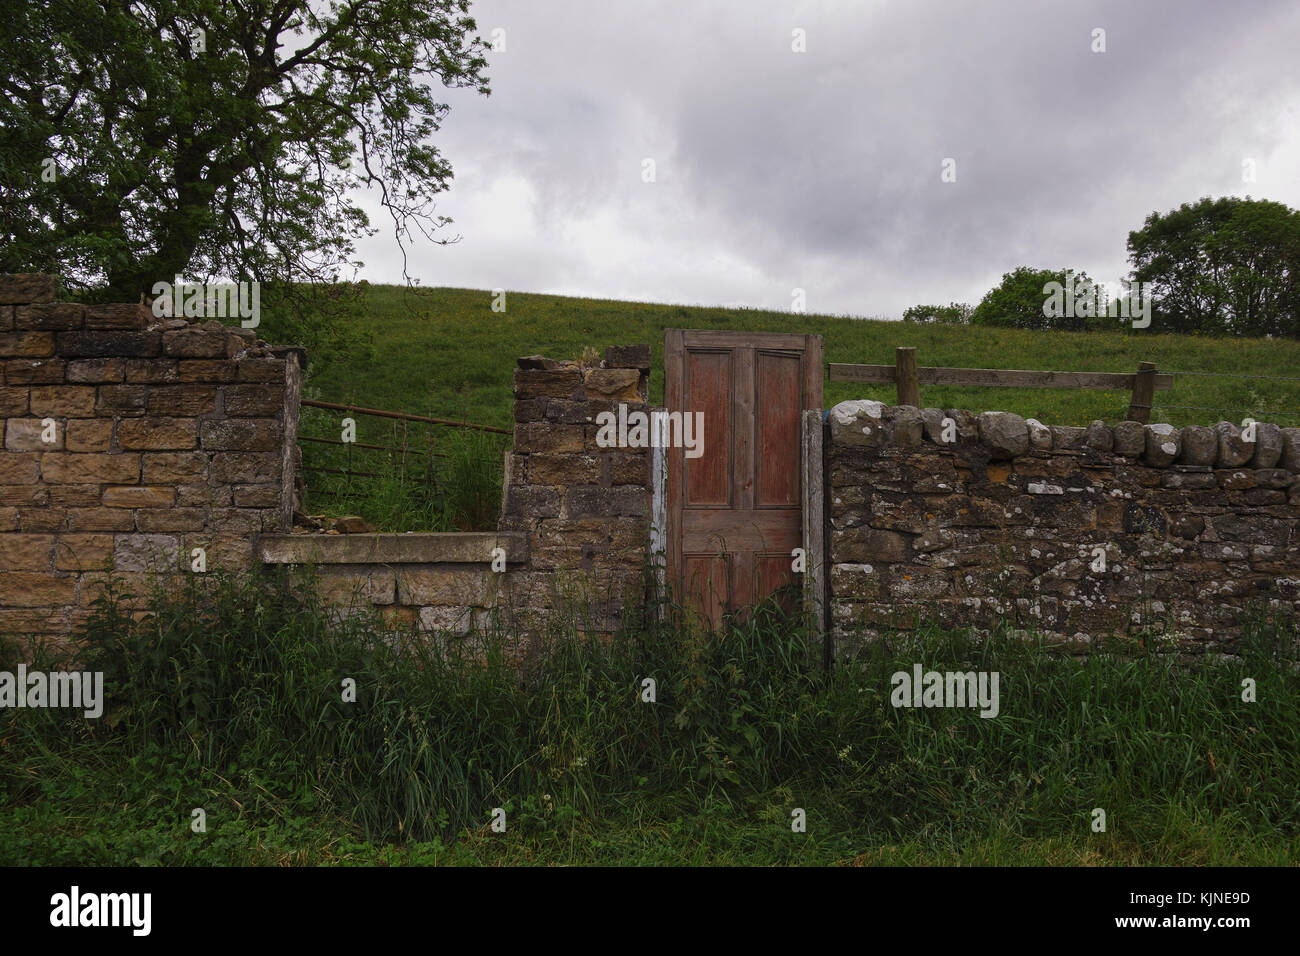 Doorway to the countryside, in Weardale in County Durham, North east England. A wooden door is incorporated into the drystone wall. Stock Photo